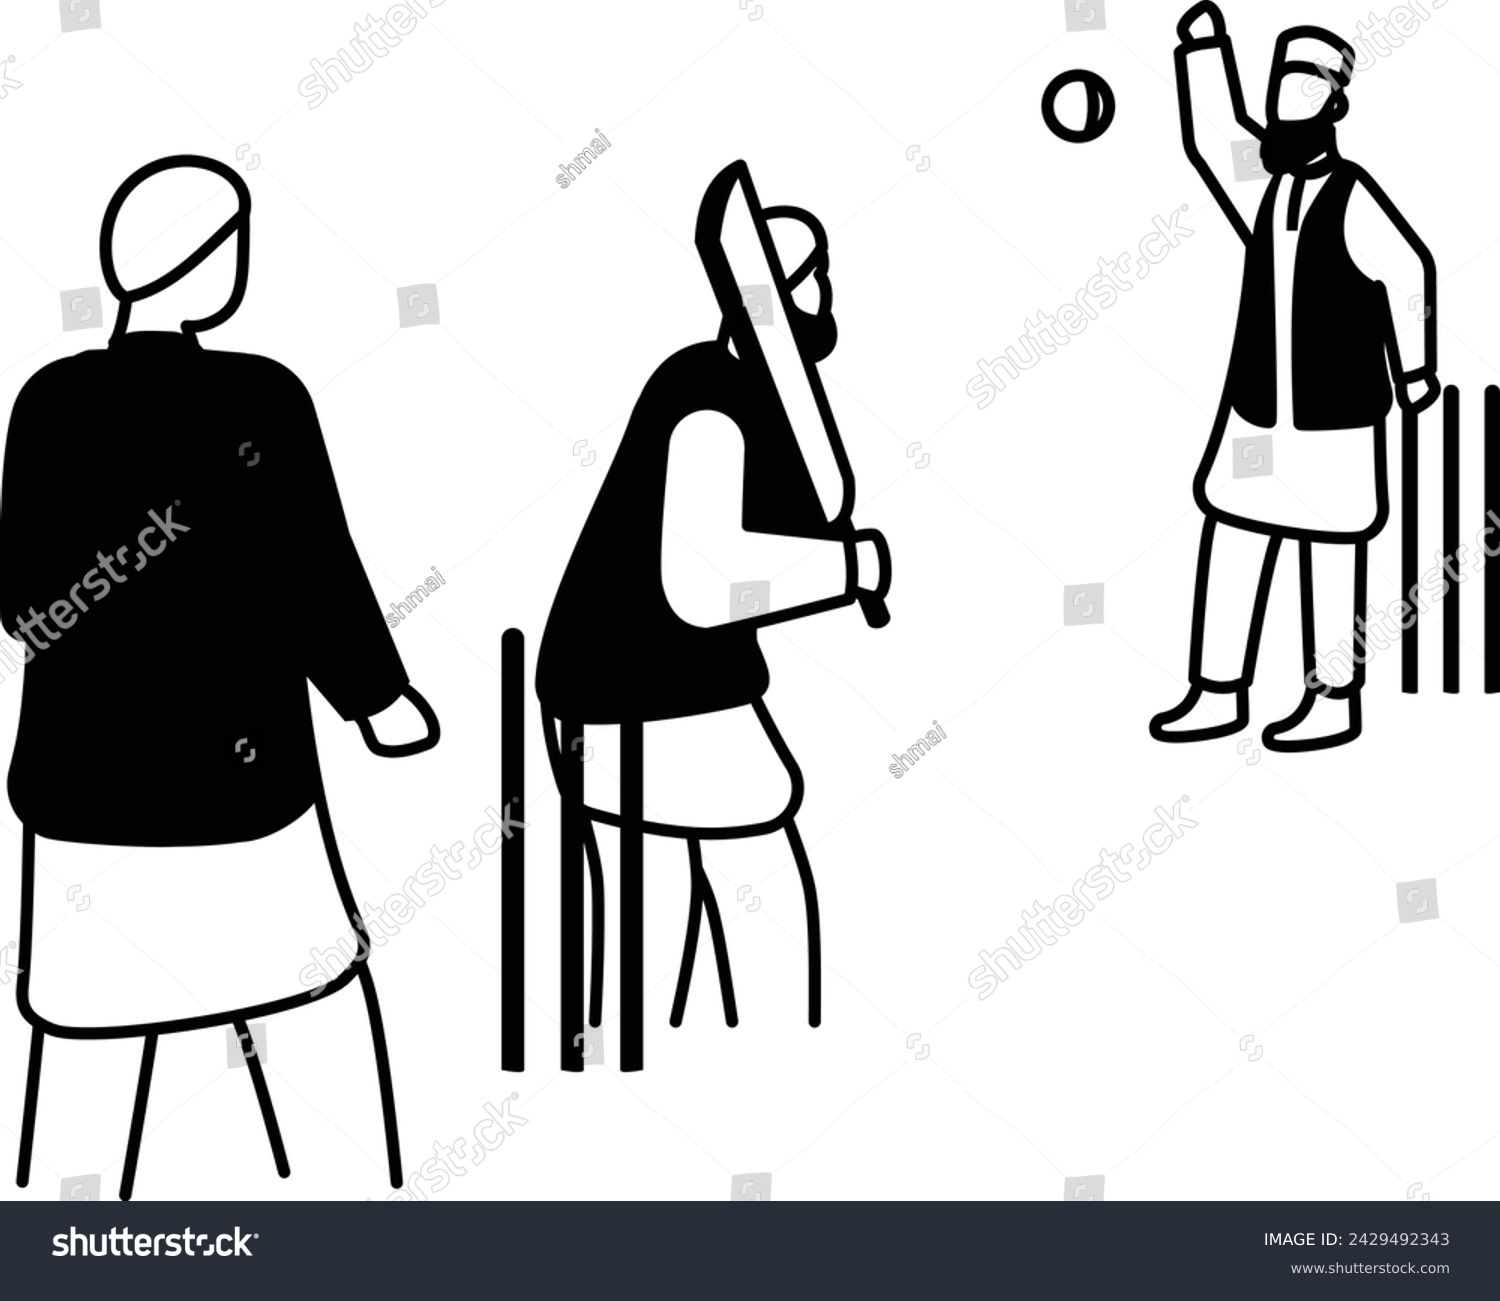 SVG of Cricketer, Bowler and Batsmen vector design, yaum-e-pakistan Symbol, Islamic republic or resolution day Sign, 23 March national holiday illustration, Person Playing Cricket as Honorary Match concept svg